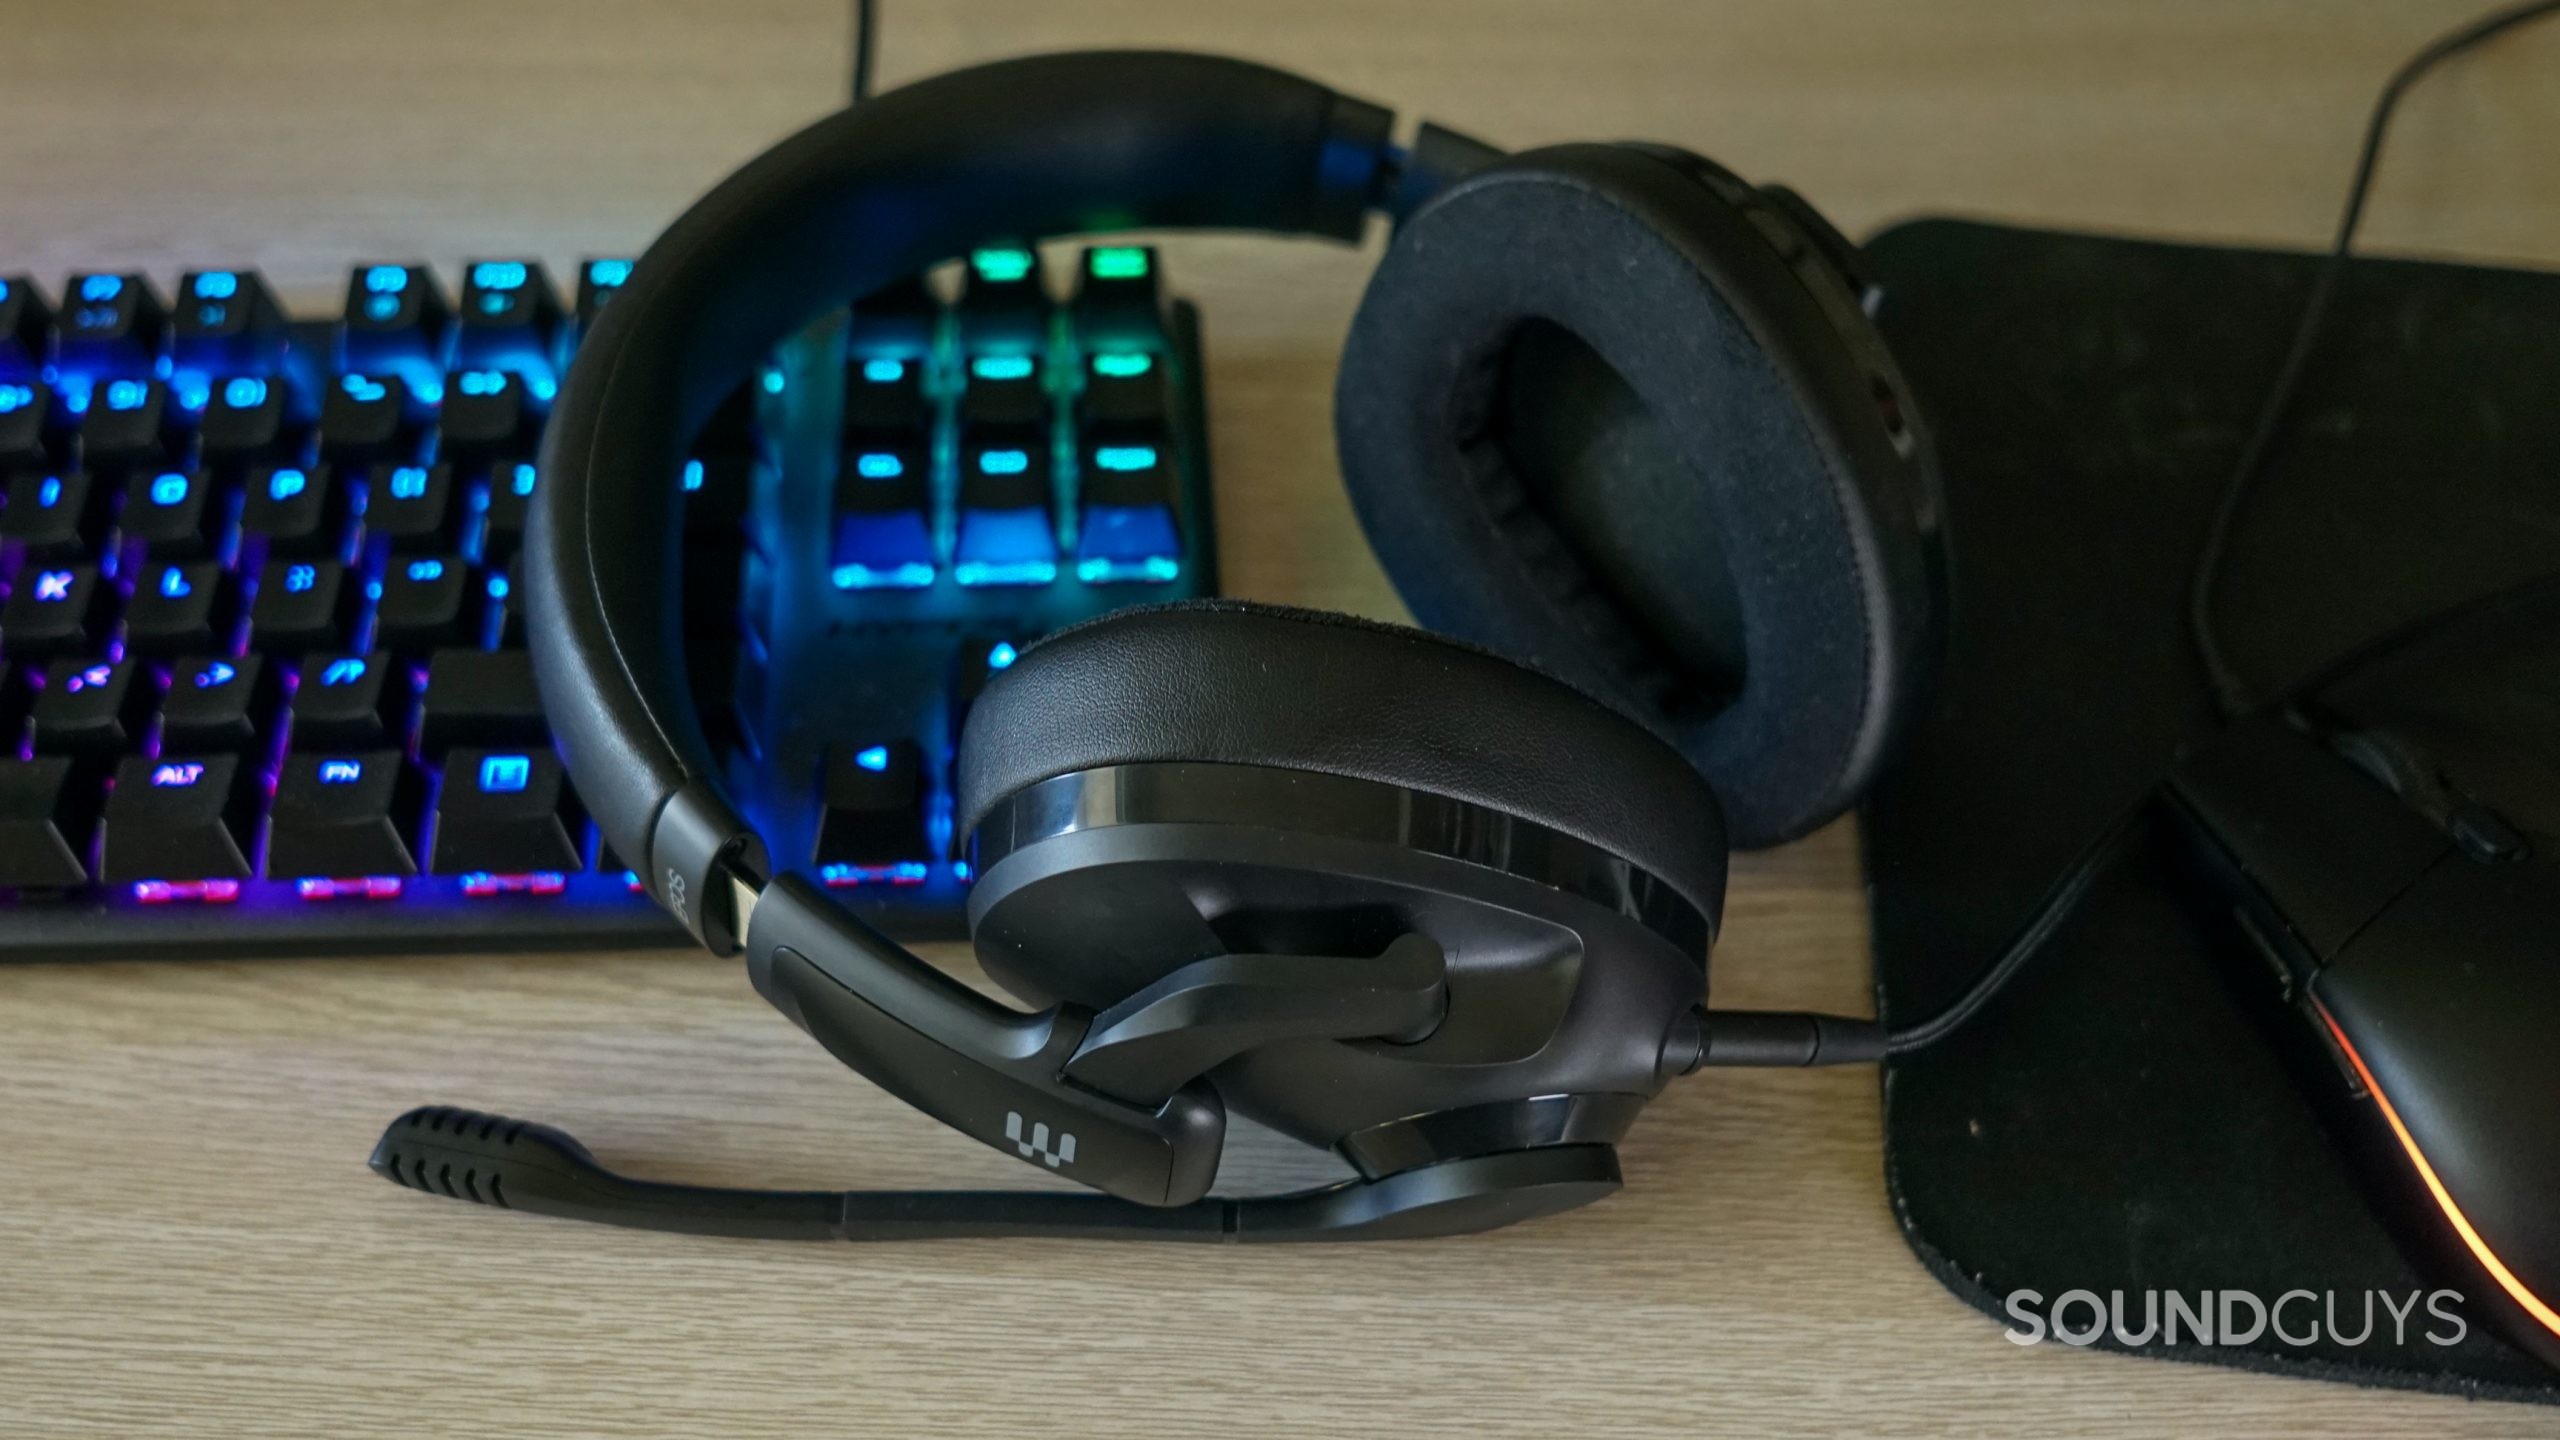 The EPOS H3 gaming headset lays on a desk next to a HyperX Alloy Origins mechanical gaming keyboard and Logitech Hero gaming mouse.